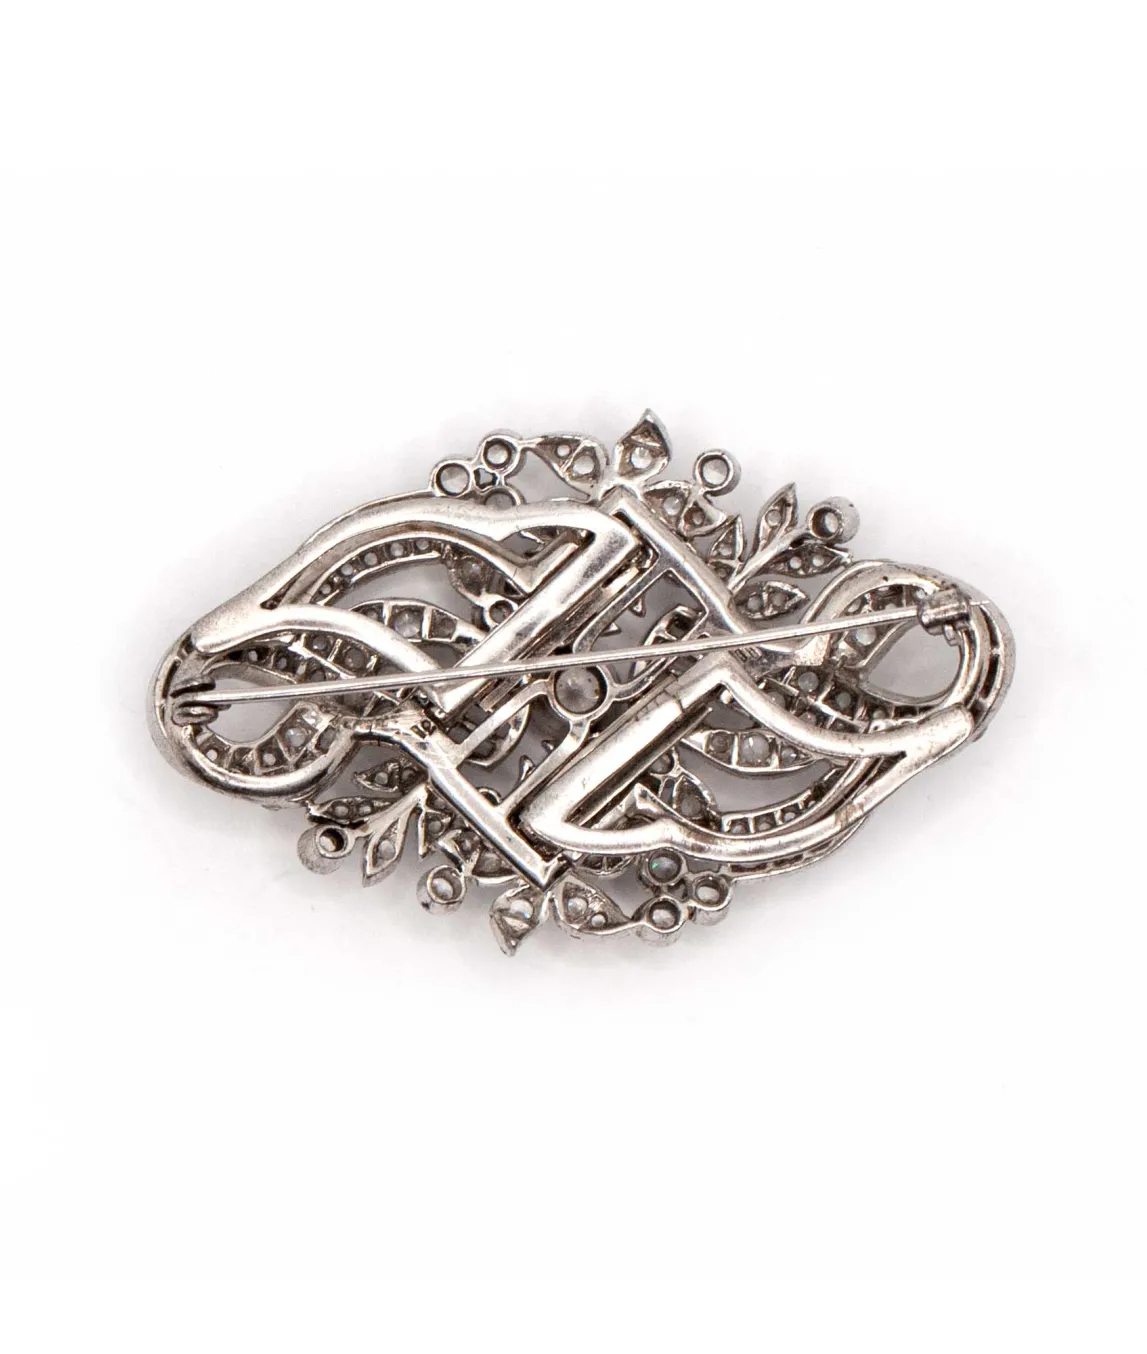 Back of double clip brooch silver tone metal